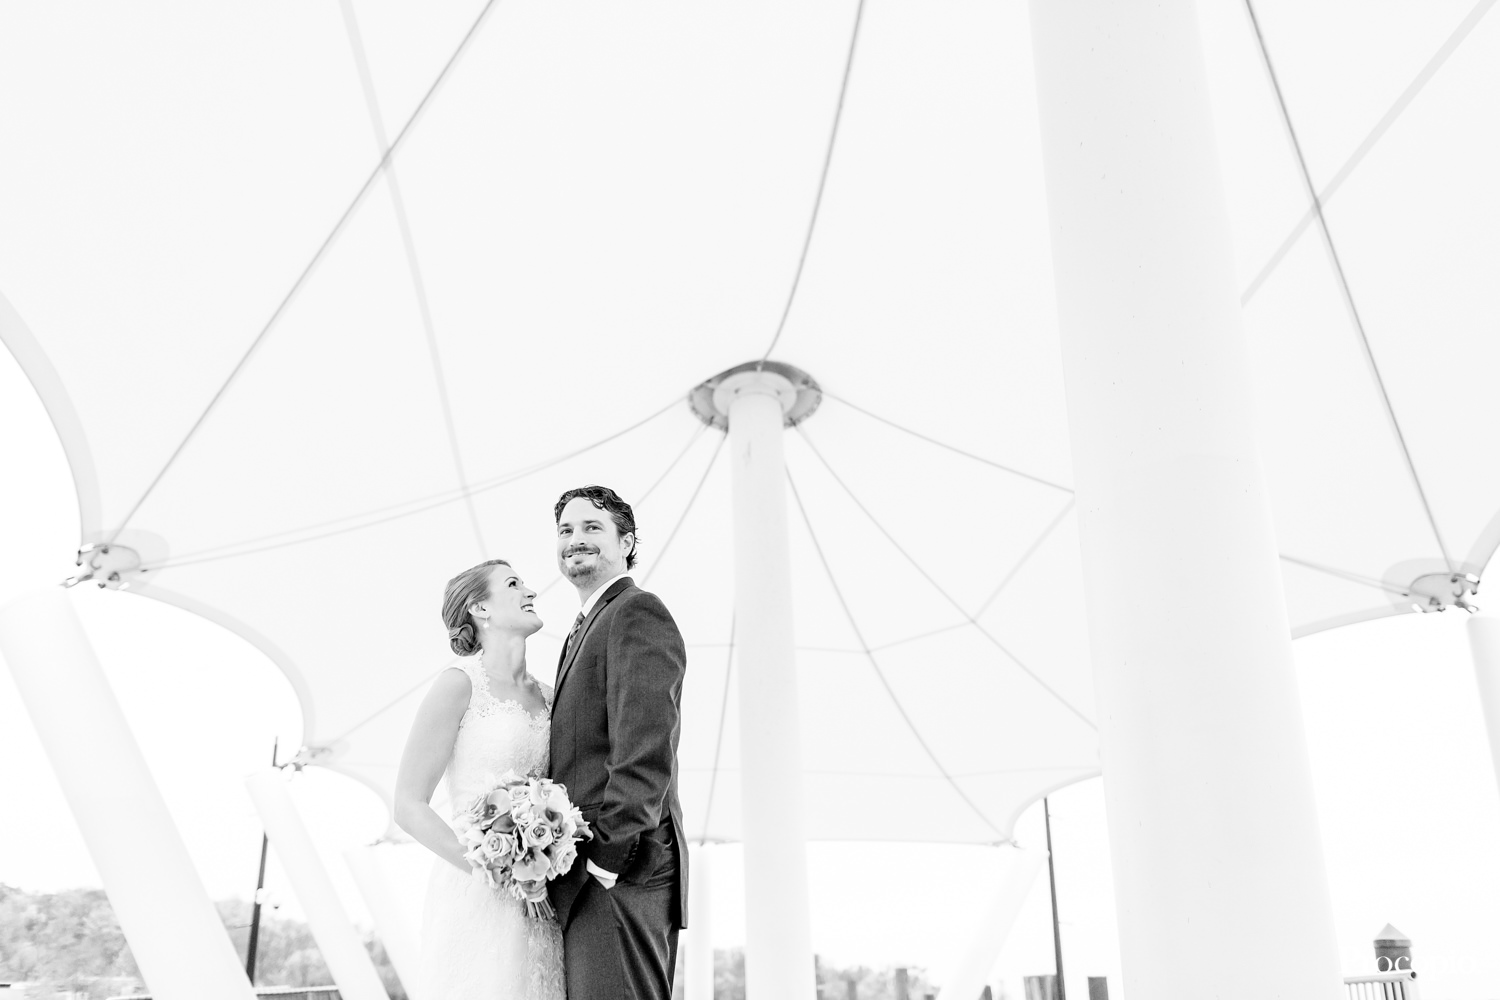 Washington National Harbor, The Sunset Room, Washington DC, wedding colors are purple, pink, and white, rain on your wedding day, indoor ceremony, indoor reception, fall wedding, Procopio Photography, best top Washington DC photographer, best top Maryland photographer, best top Virginia photographer, best top DMV photographer, best top wedding photographer, best top commercial photographer, best top portrait photographer, best top boudoir photographer, modern fine art portraits, dramatic, unique, different, bold, editorial, photojournalism, award winning photographer, published photographer, memorable images, be different, stand out